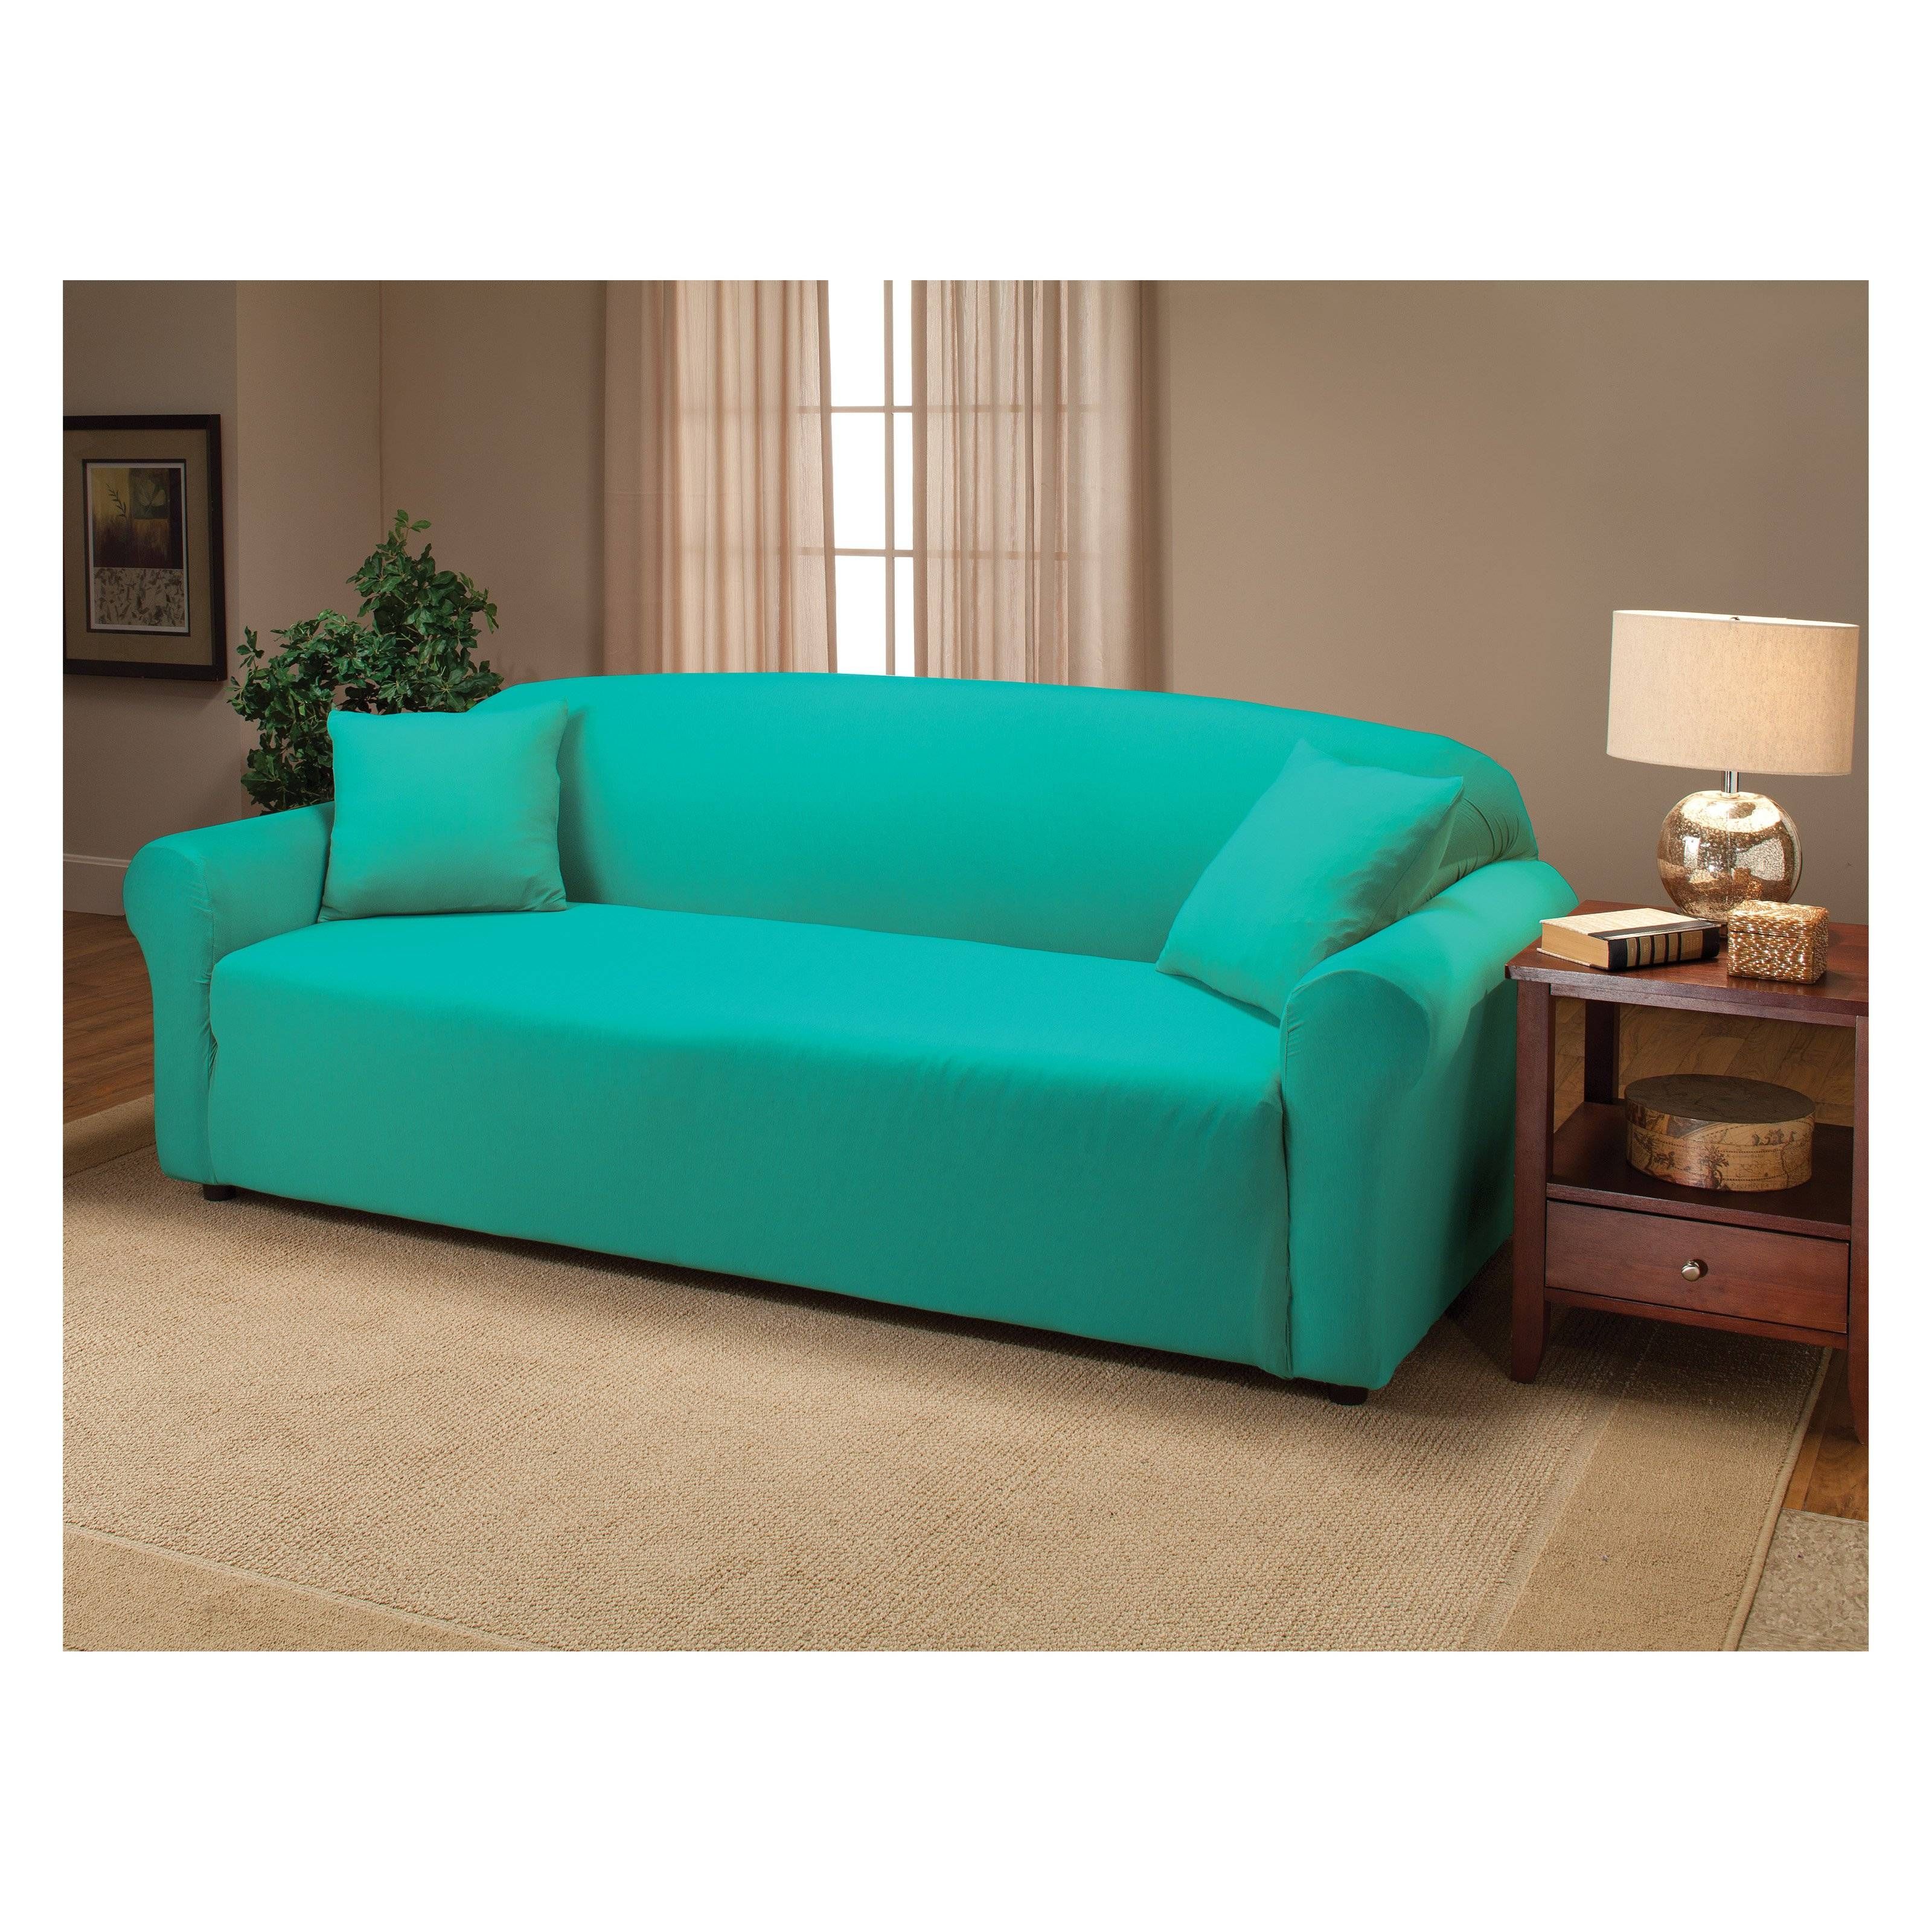 Maytex Stretch Pixel Two Piece Sofa Slipcover | Hayneedle Intended For Stretch Slipcover Sofas (Photo 10 of 15)